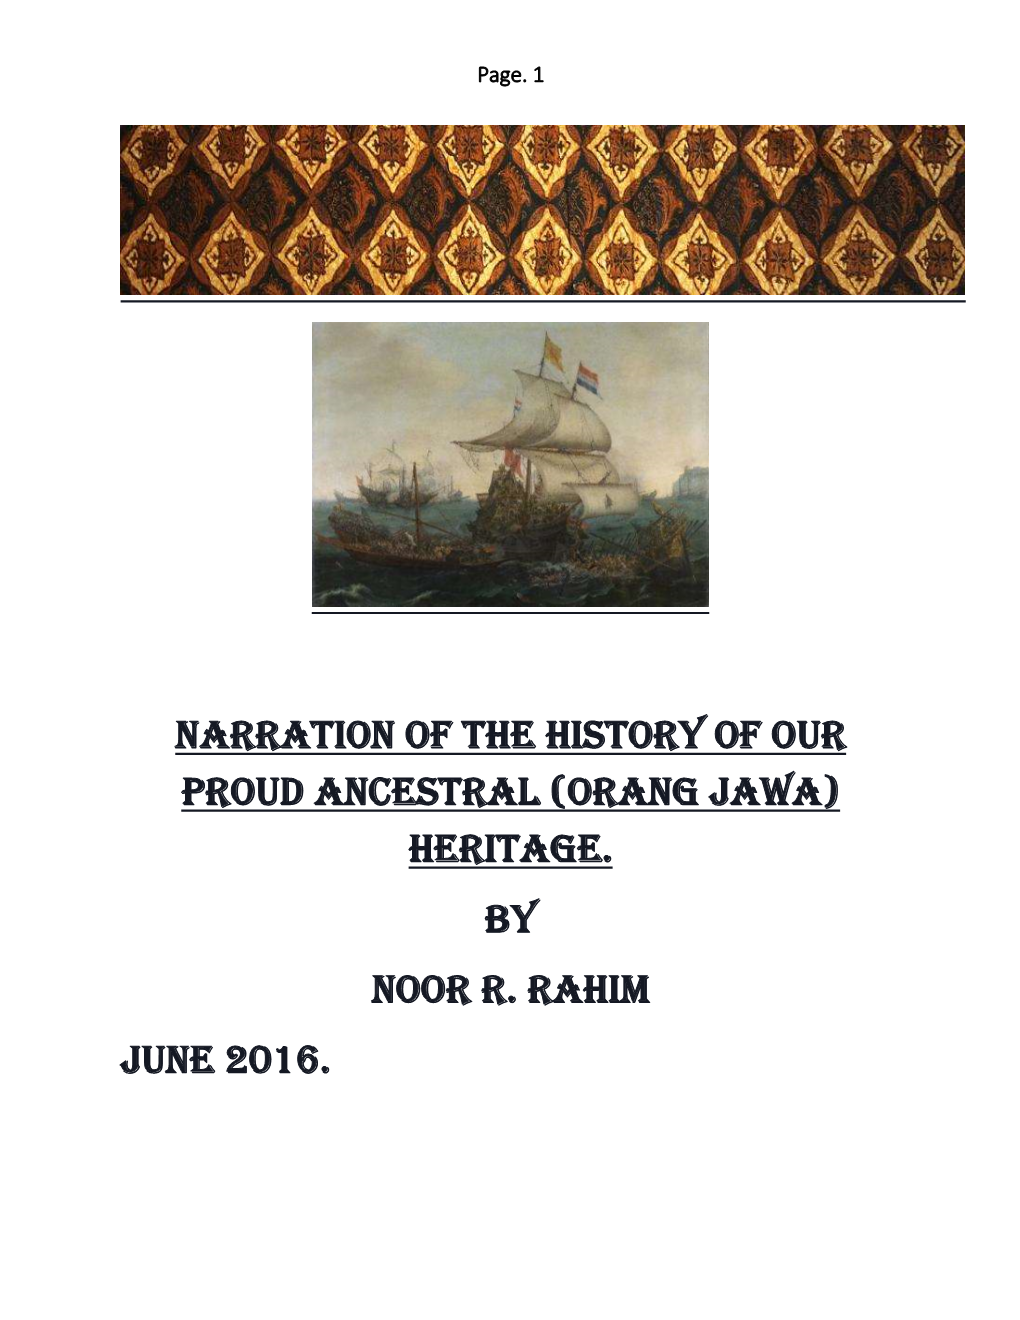 Narration of the History of Our Proud Ancestral (Orang Jawa) Heritage